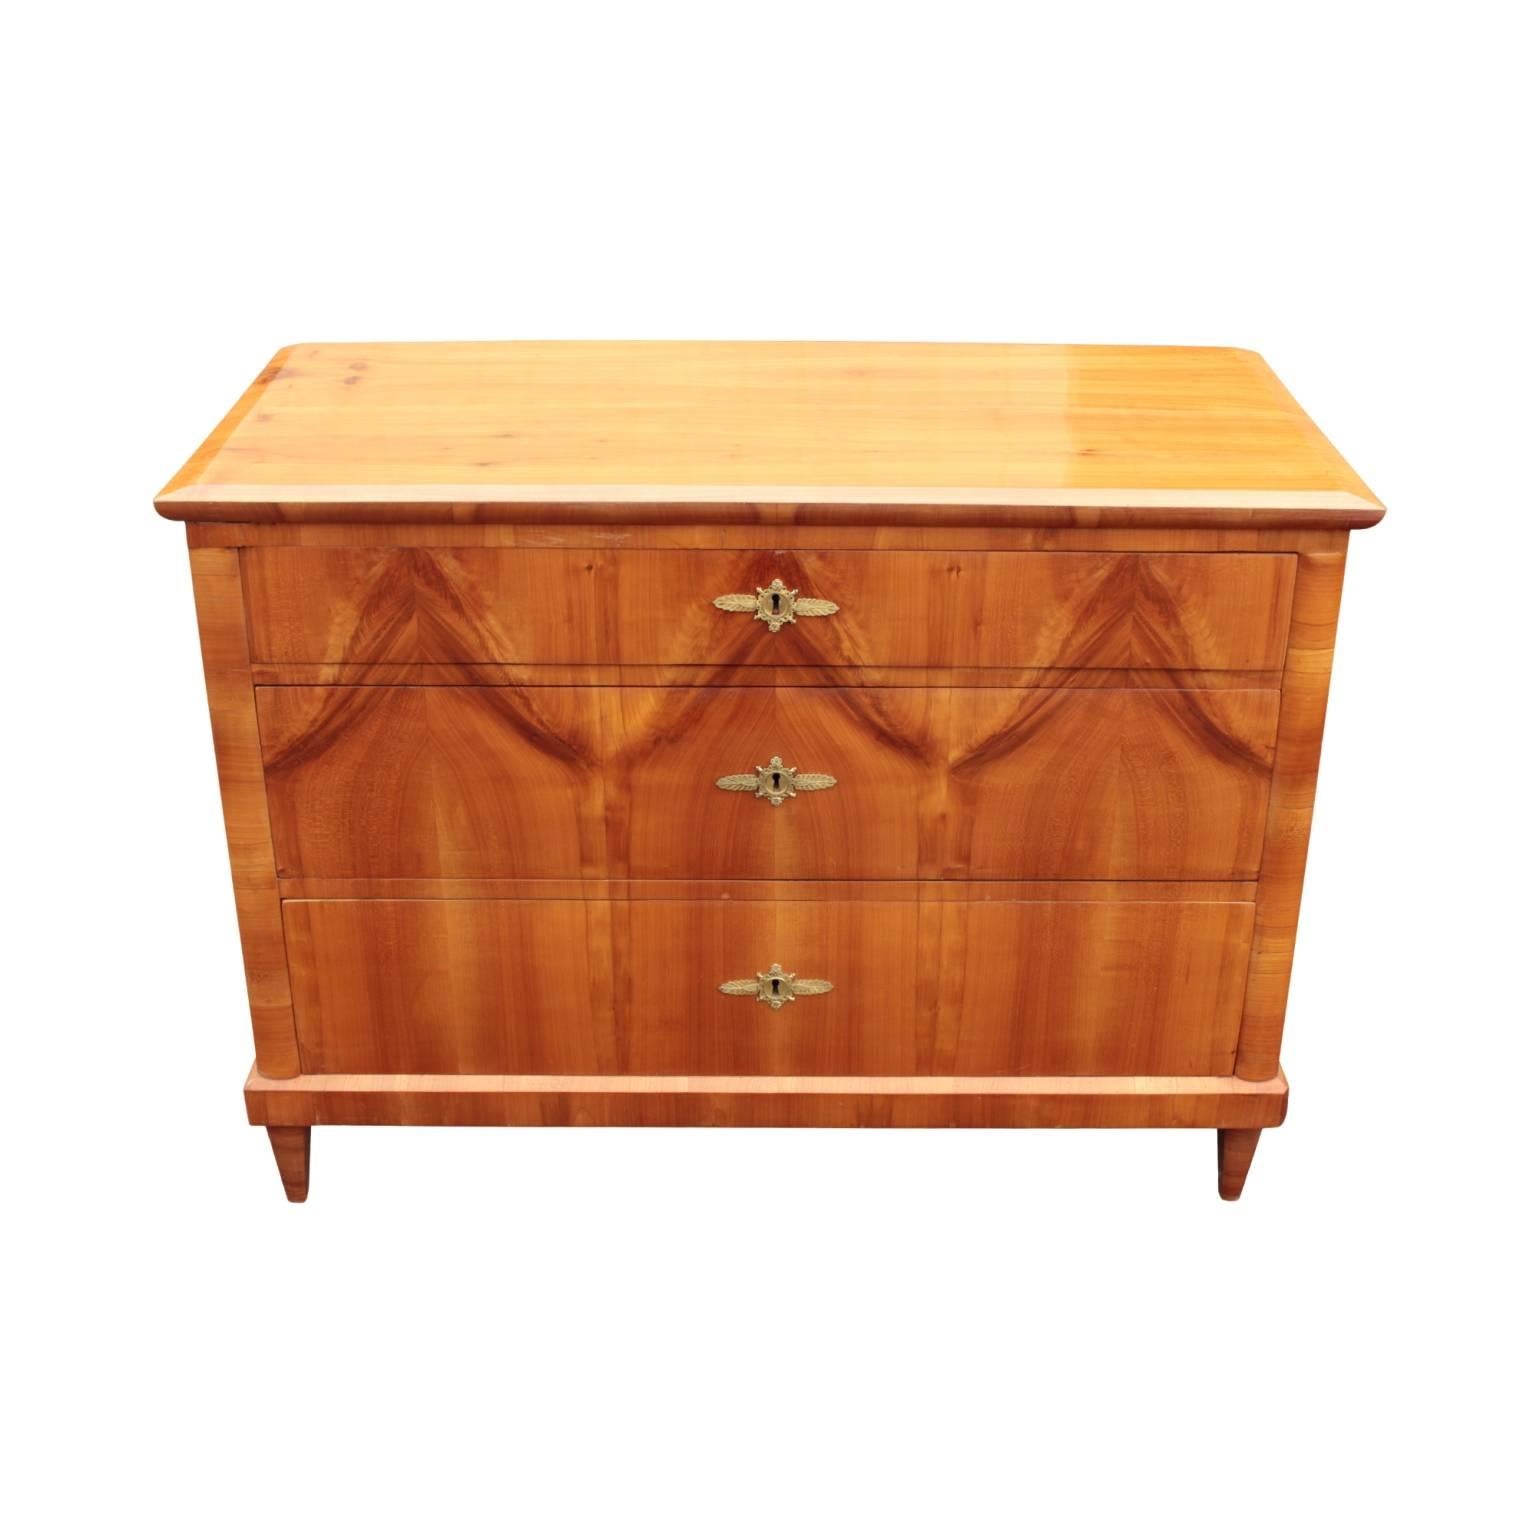 German Biedermeier Period Chest of Drawers In Excellent Condition For Sale In Hudson, NY